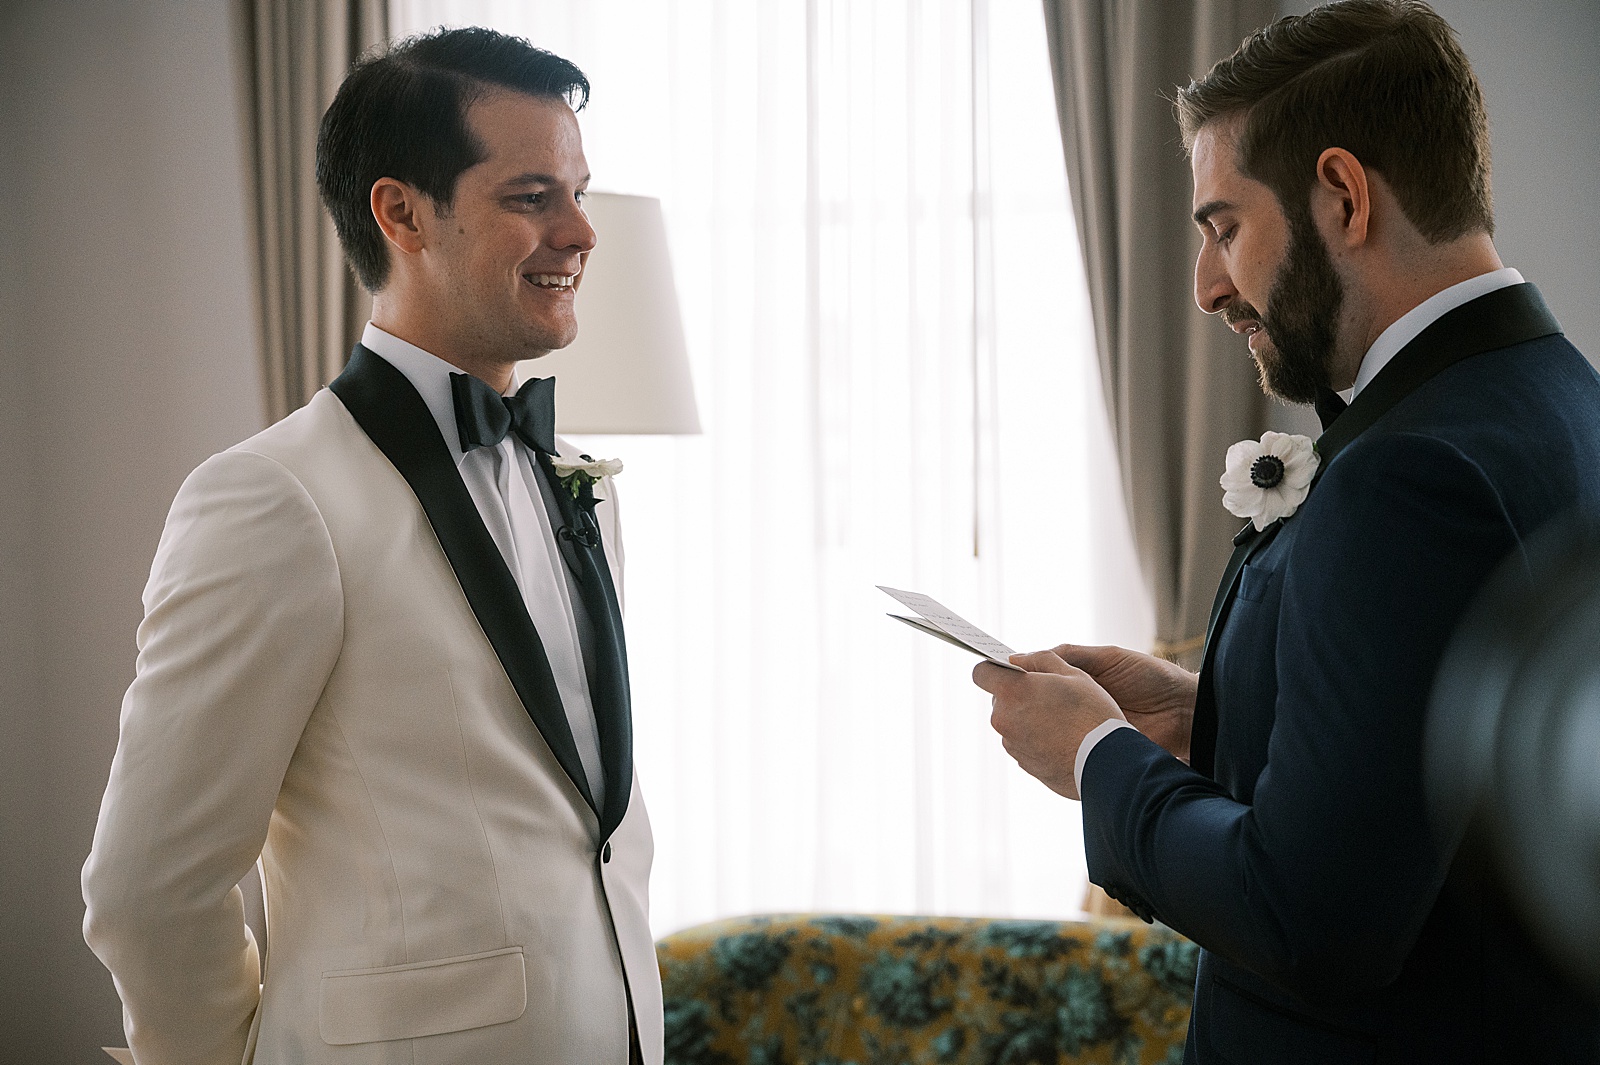 Two grooms exchange private vows in a hotel suite.